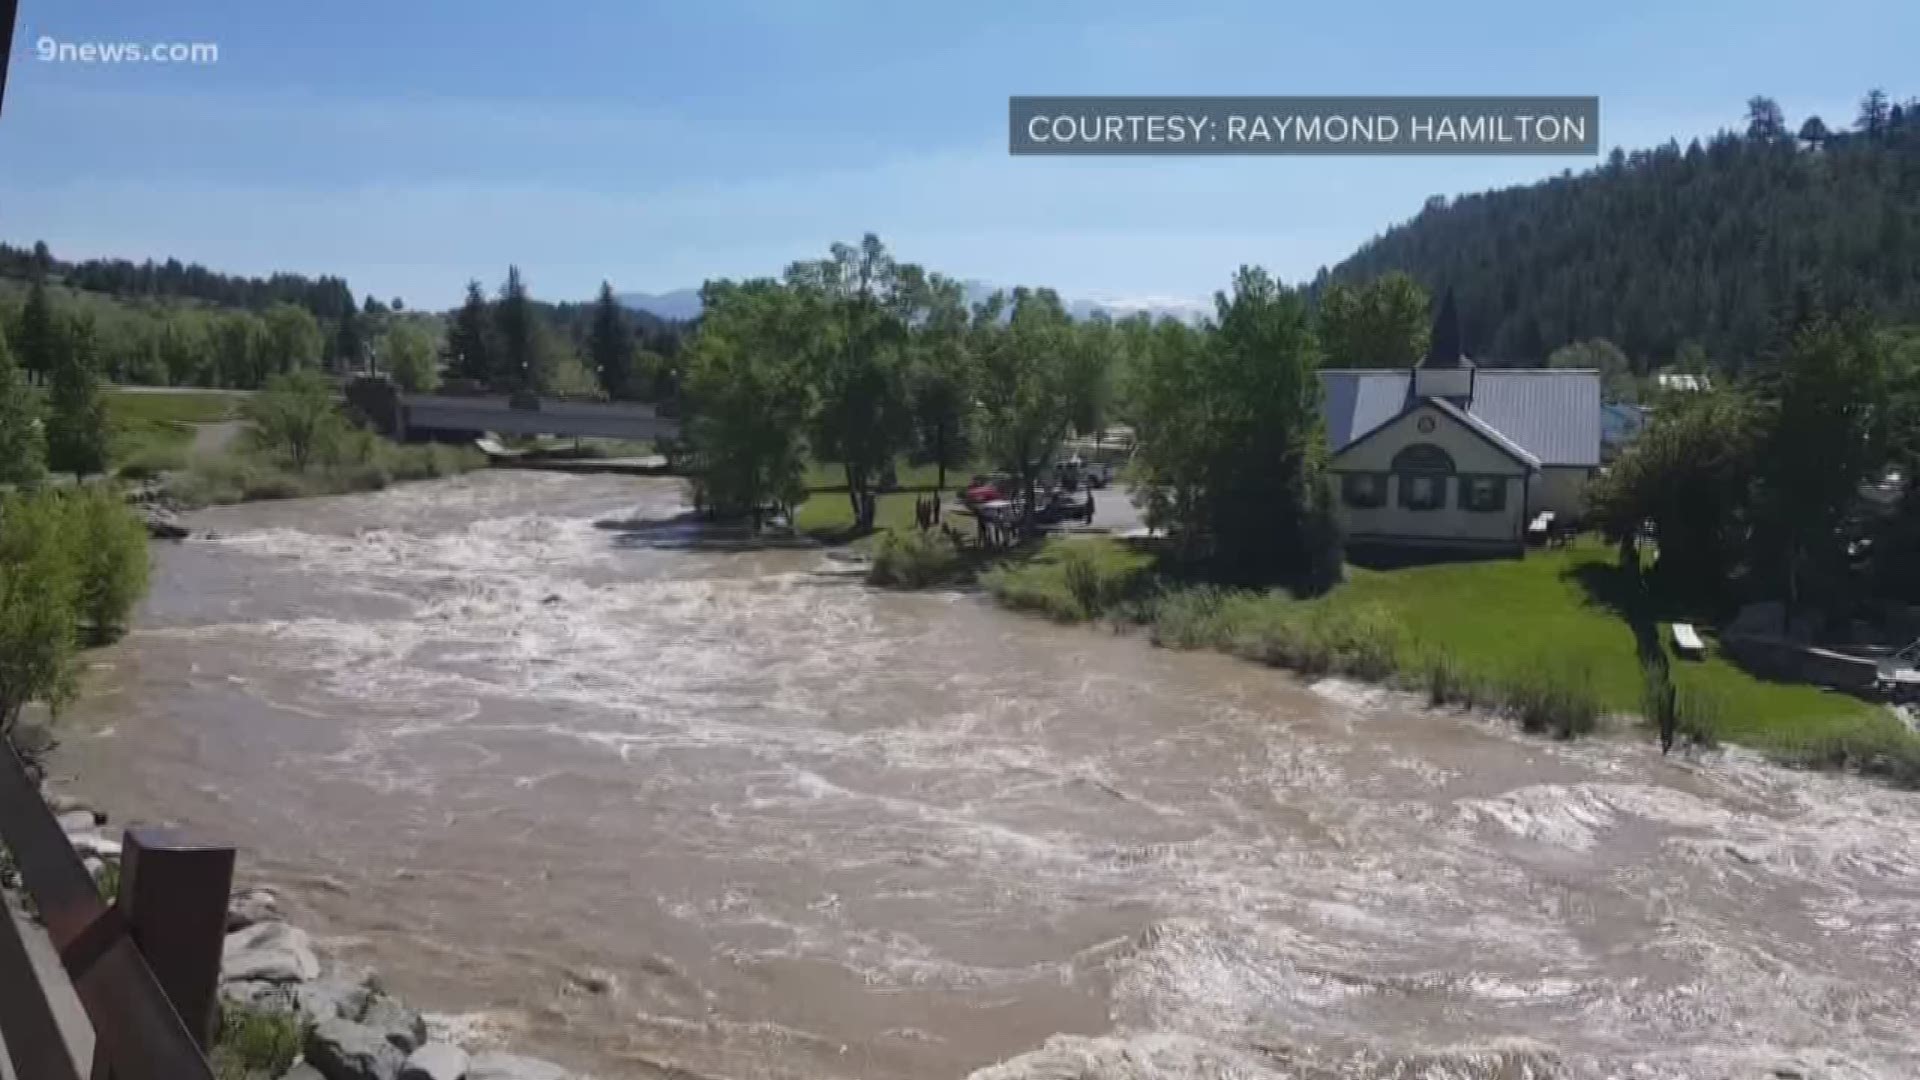 Water is rising in Colorado's rivers as record snowpack starts to melt